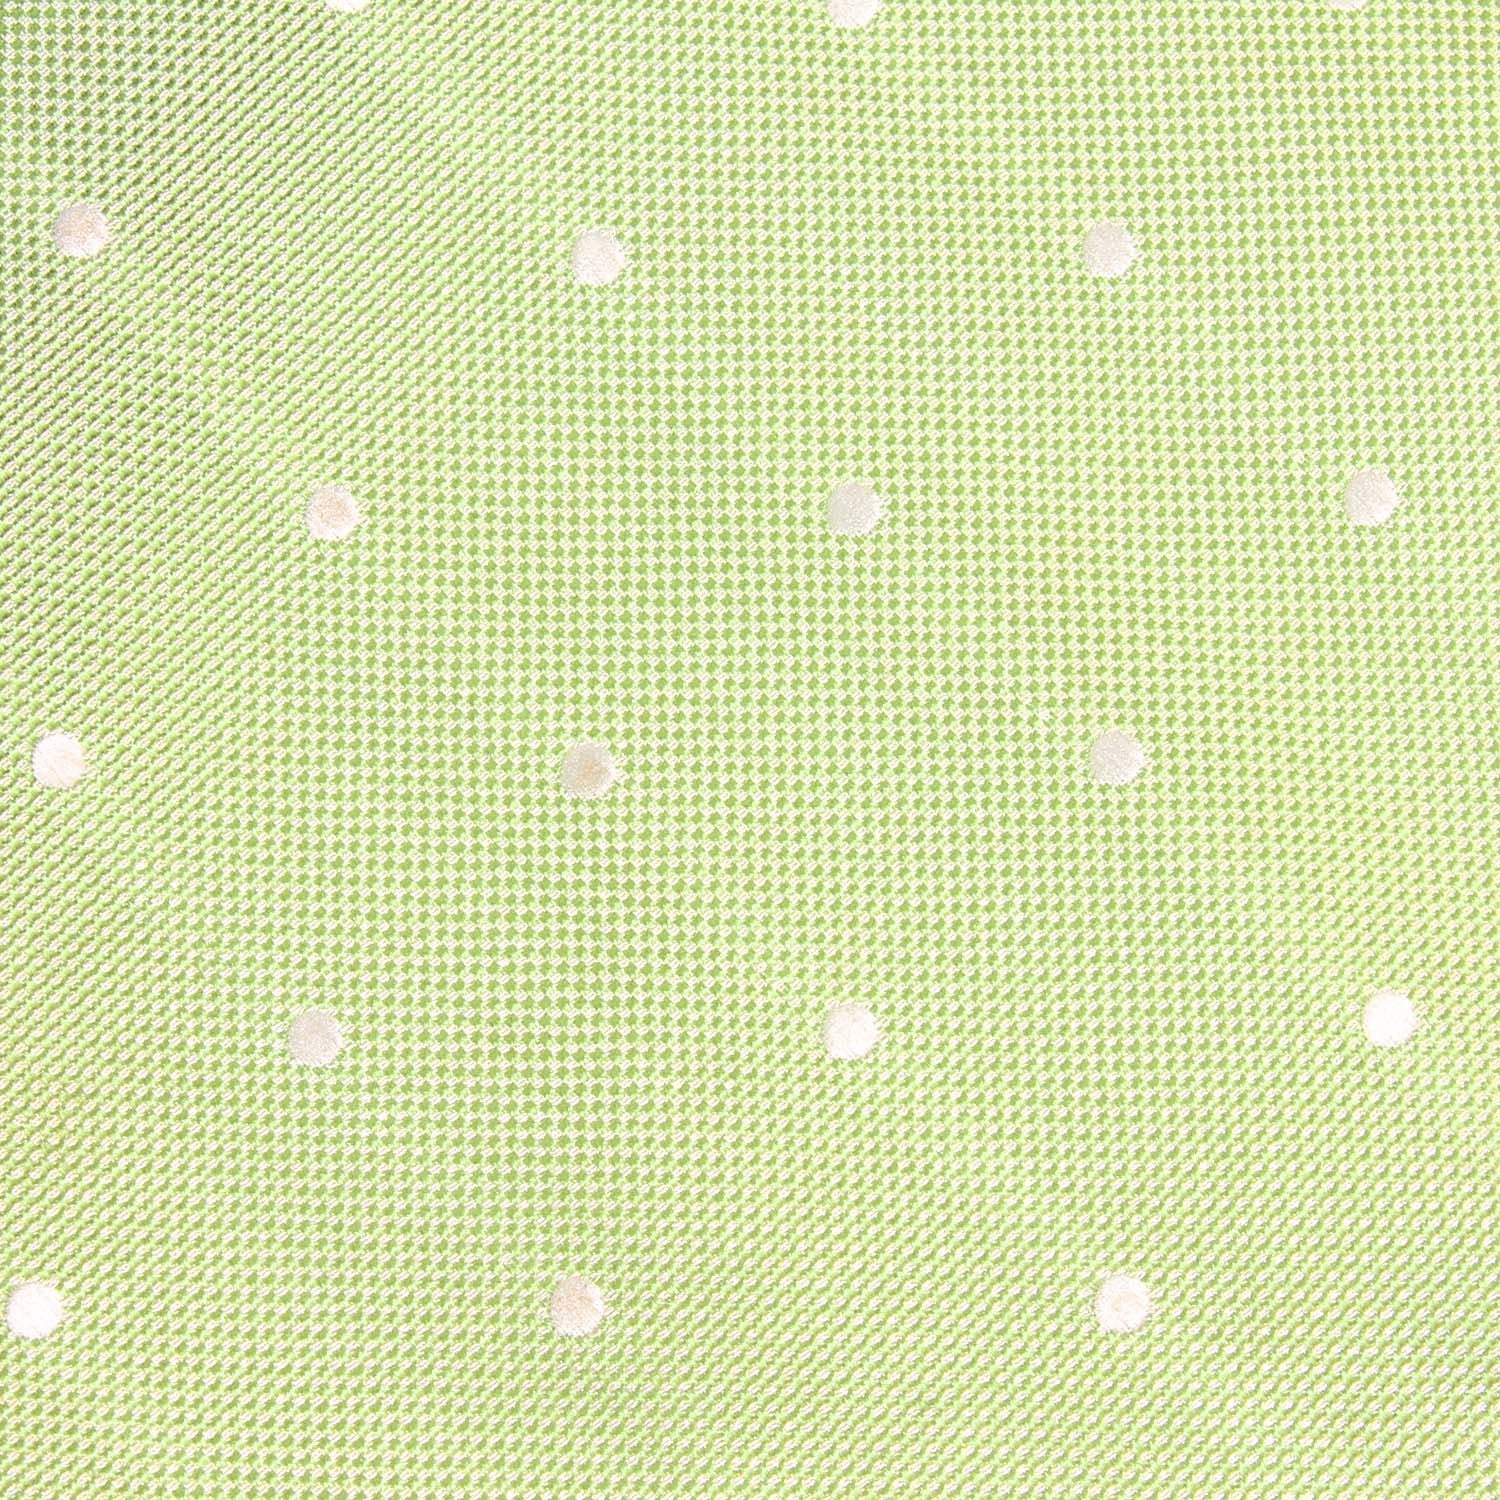 Light Mint Pistachio Green with White Polka Dots Fabric Bow Tie X239